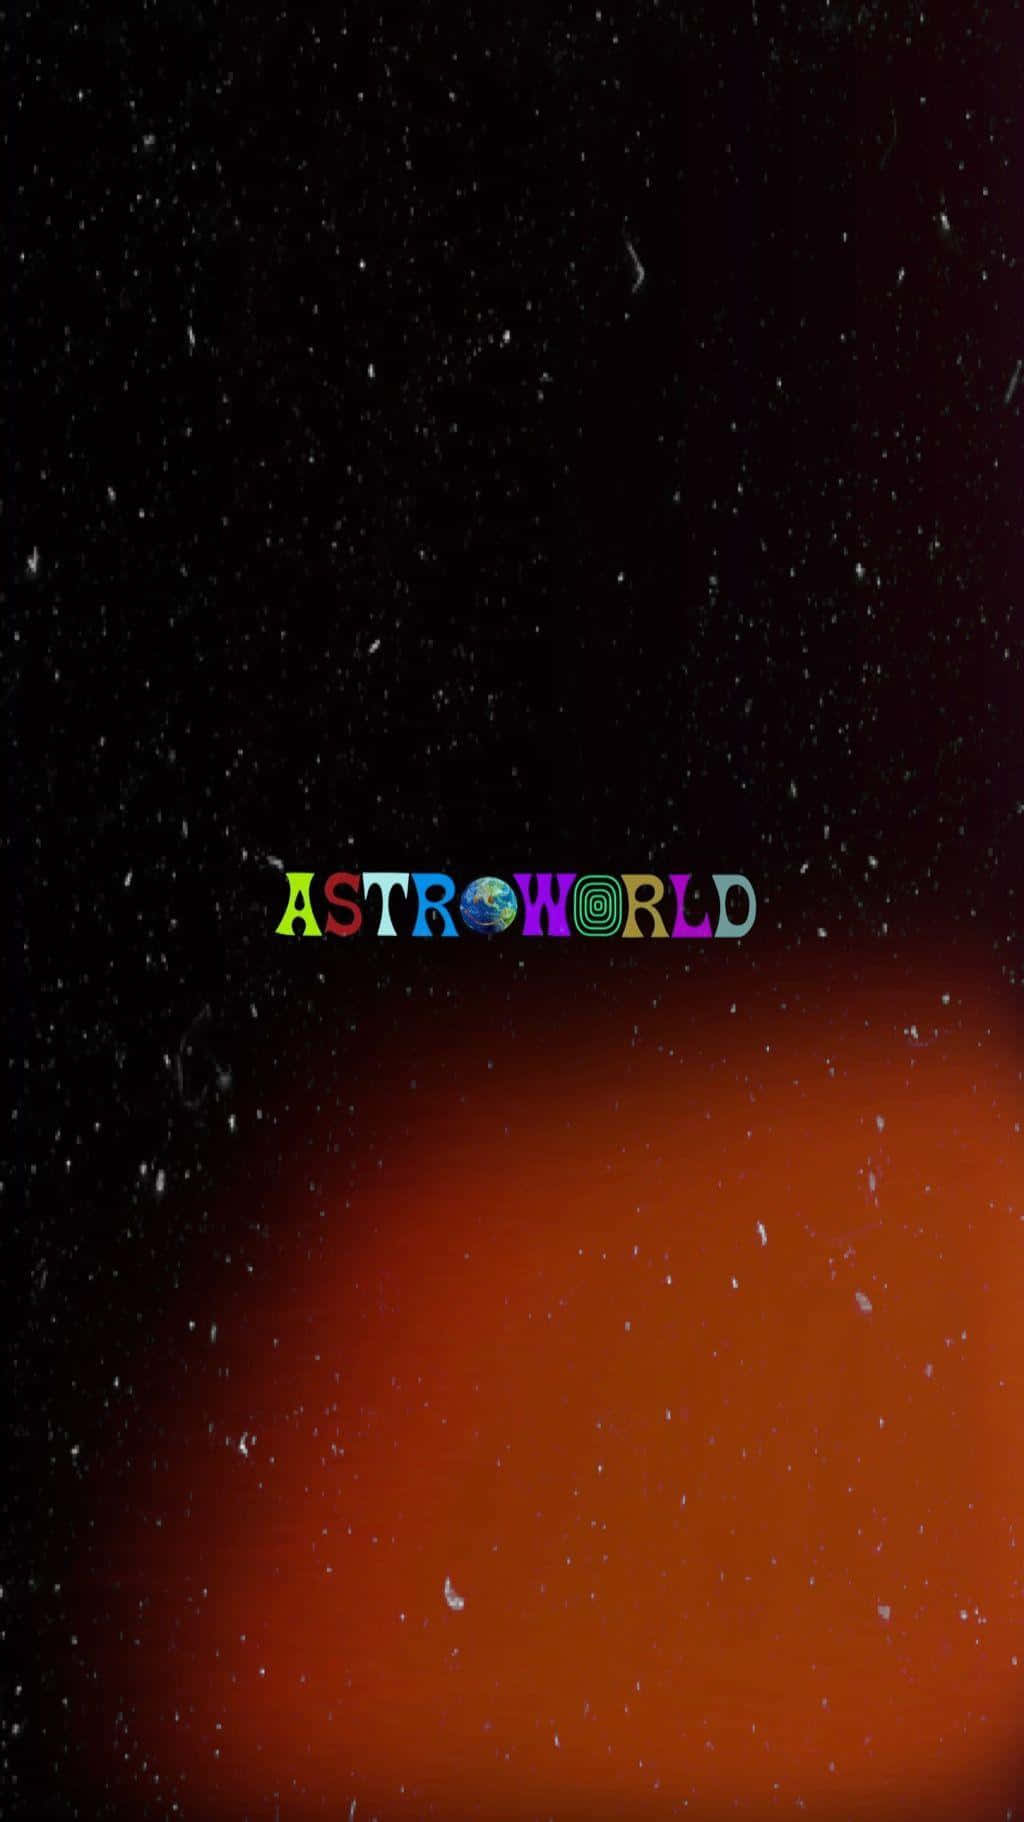 Come join us in Astroworld and live the dream.